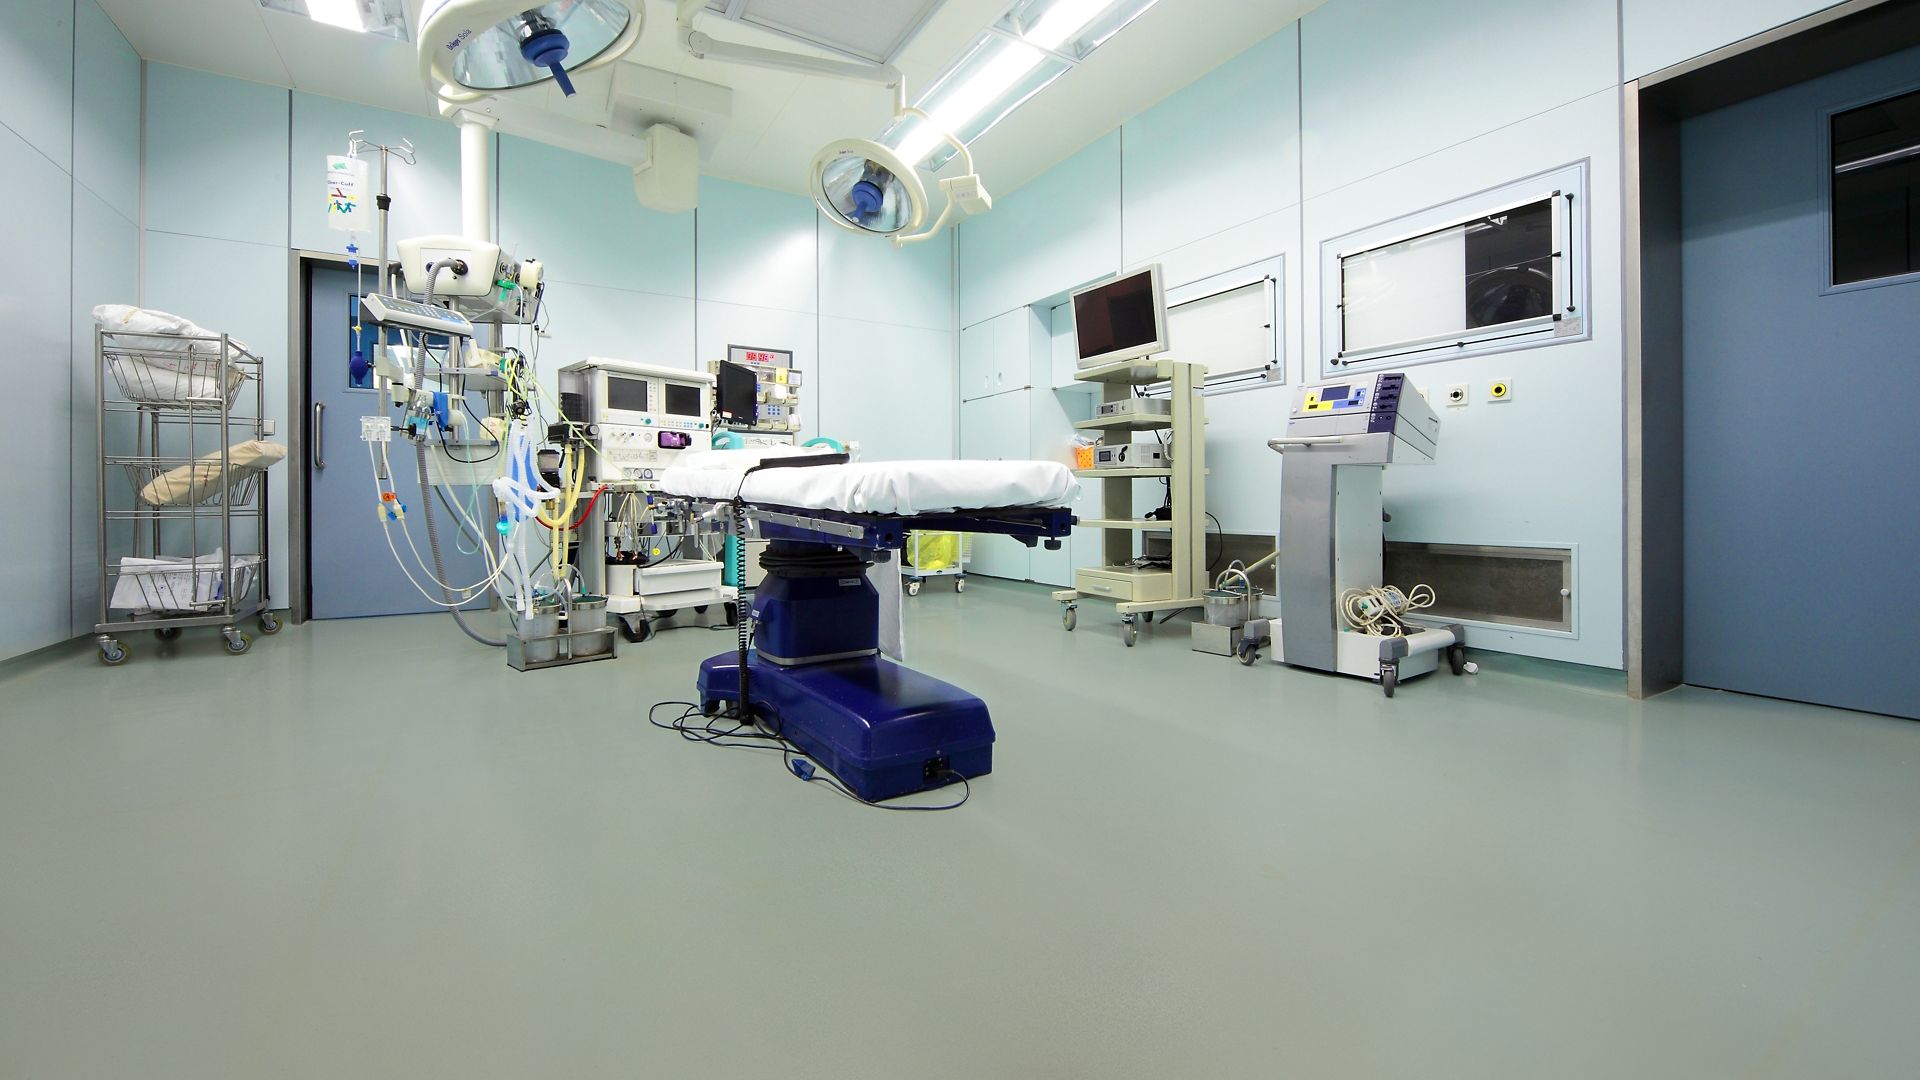 Hygienic floor and wall coating in hospital made with Sika coating systems